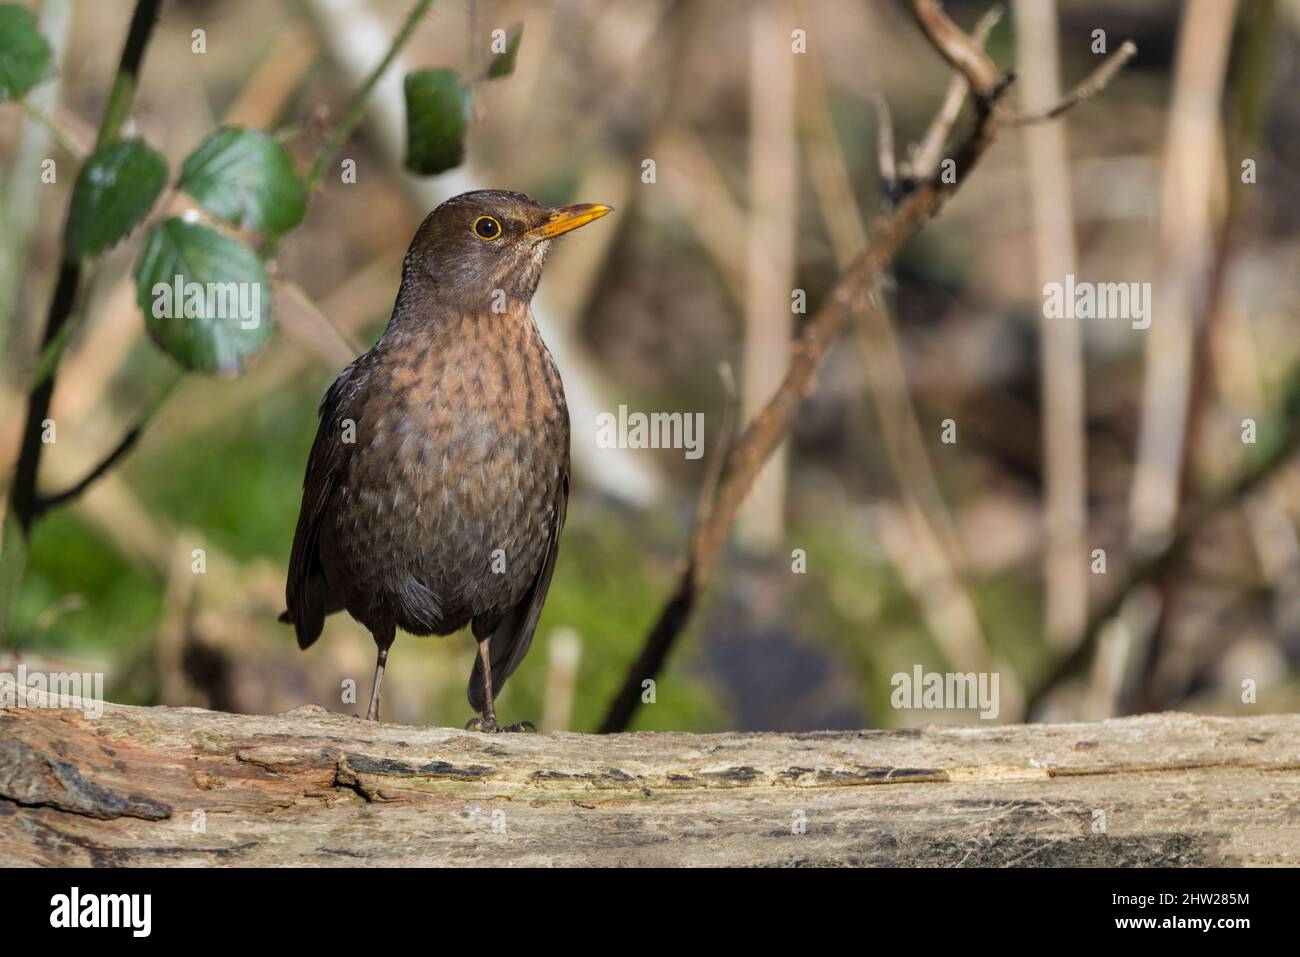 Blackbird (Turdus merula) female bird brown plumage with blurred spots on underside has yellow bill and eye rings, composed on left for copy space Stock Photo